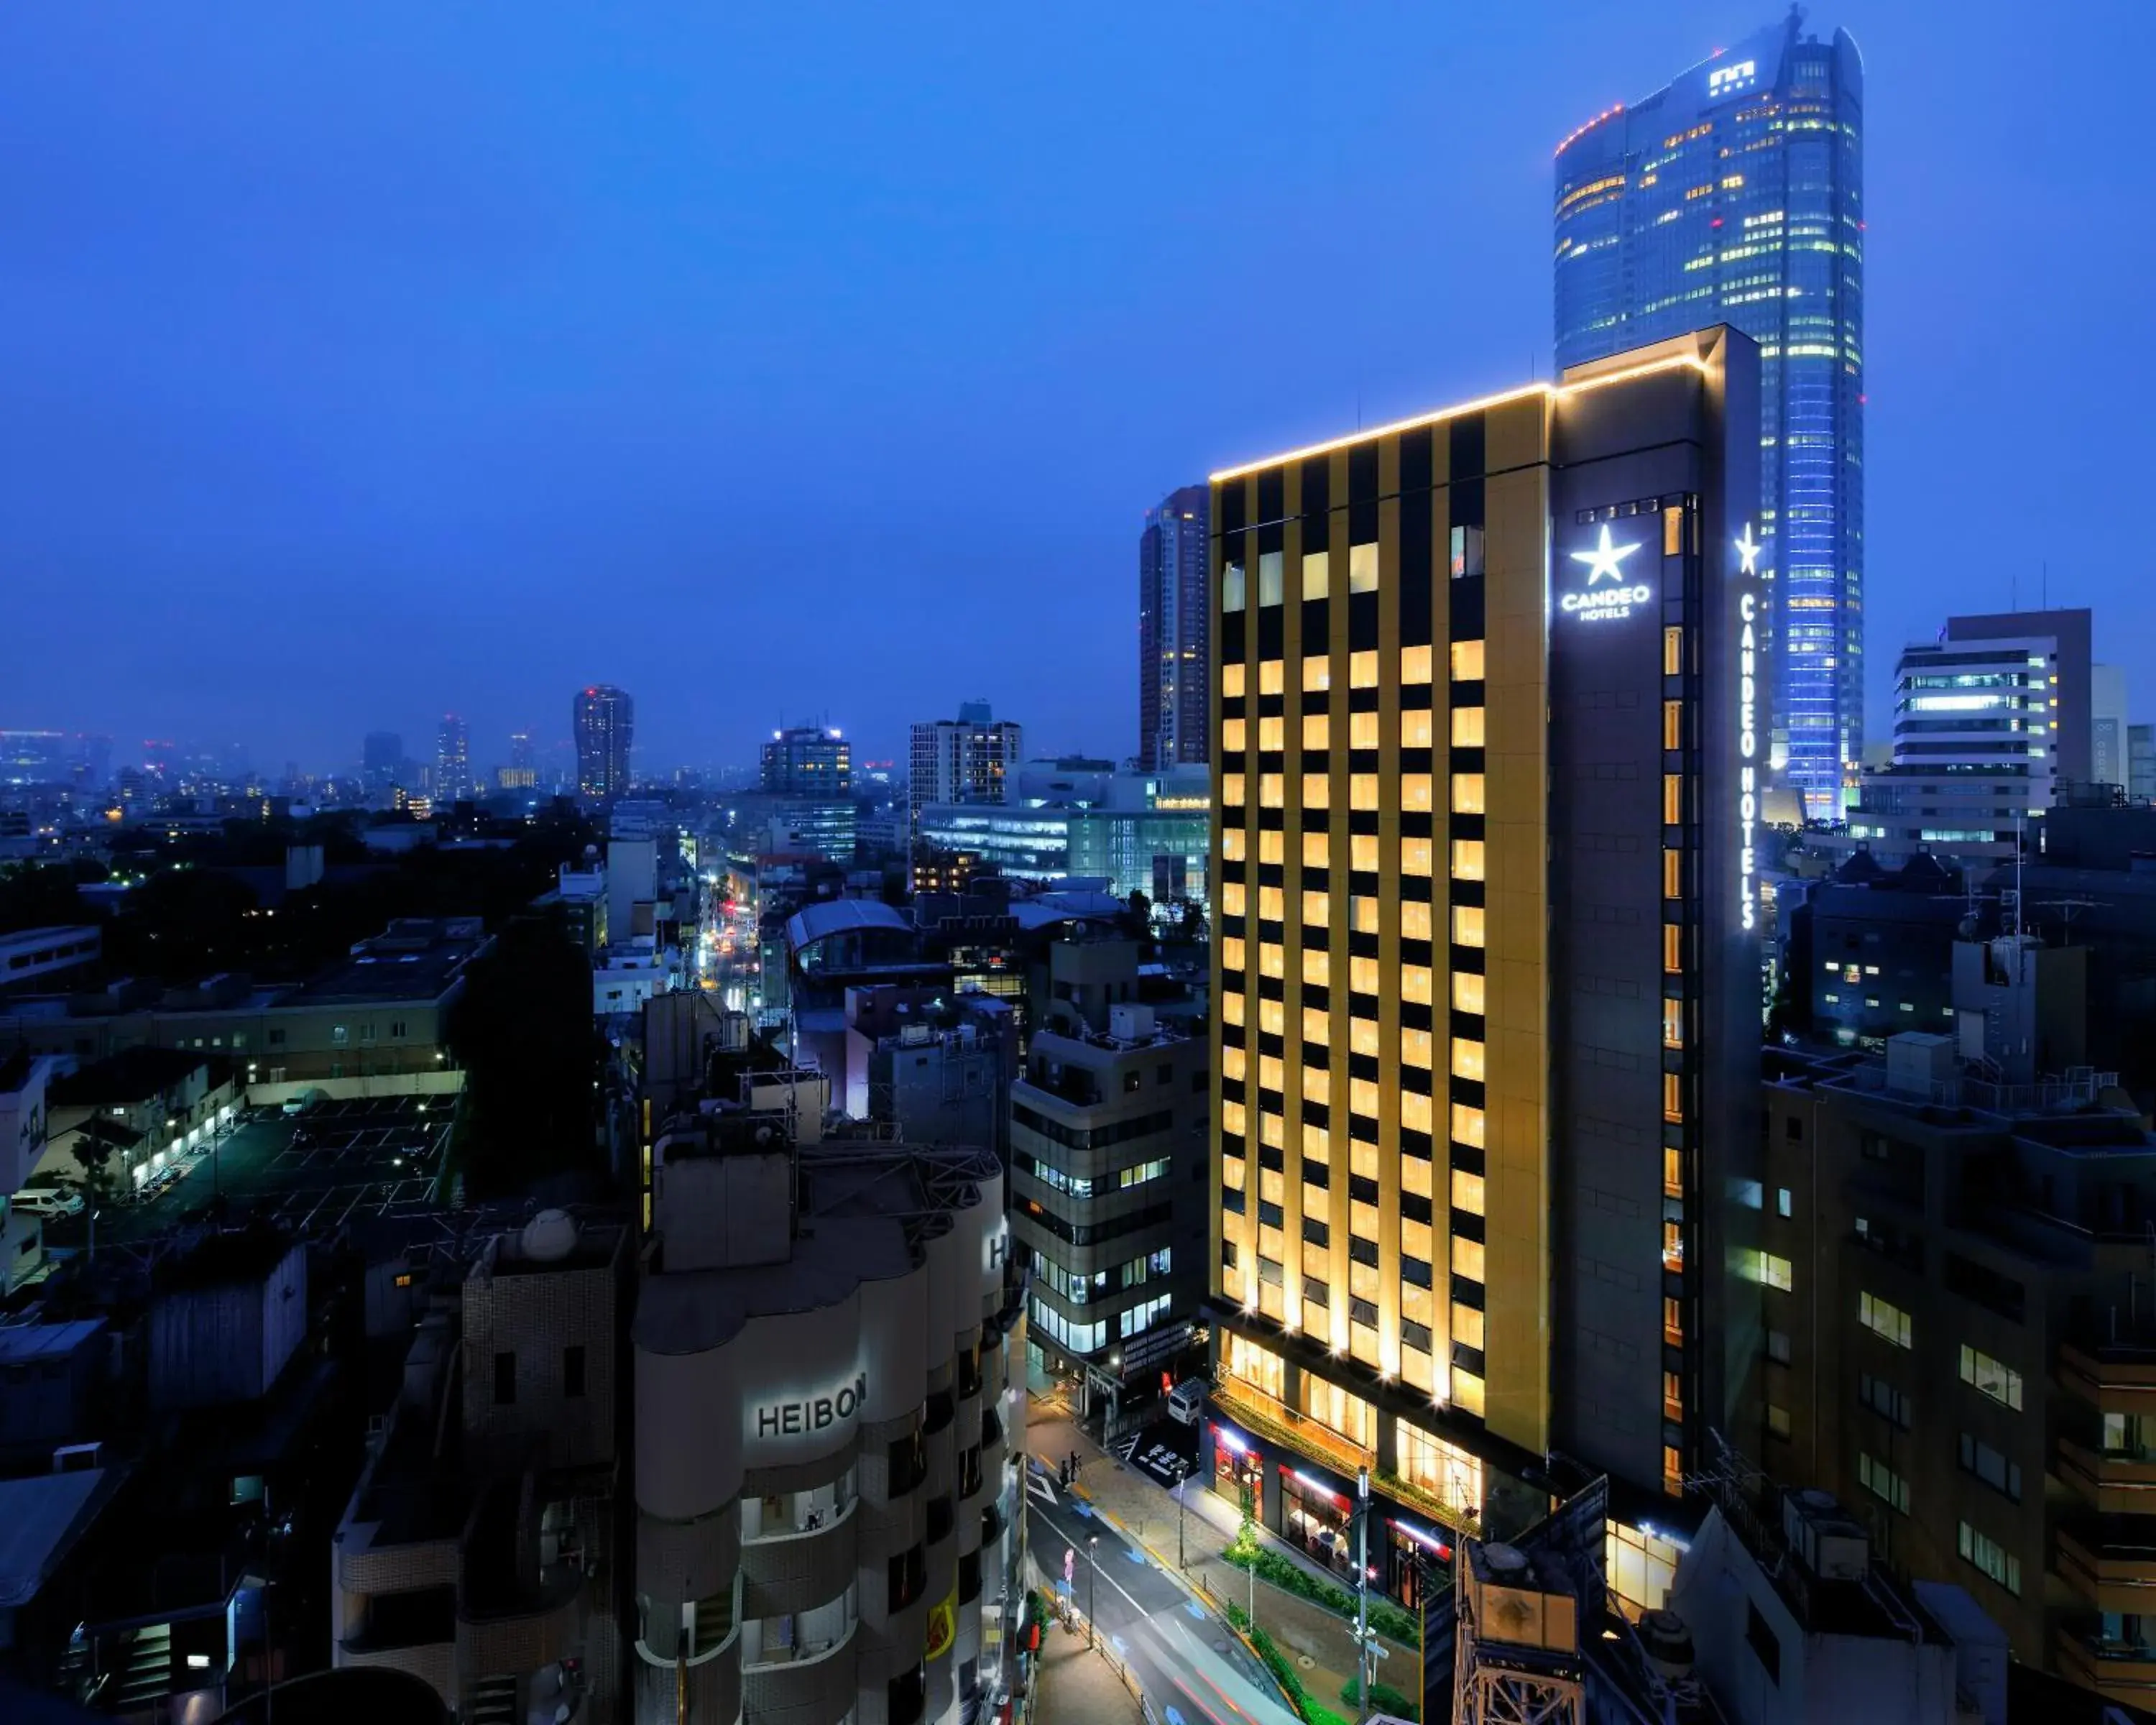 Bird's eye view in Candeo Hotels Tokyo Roppongi